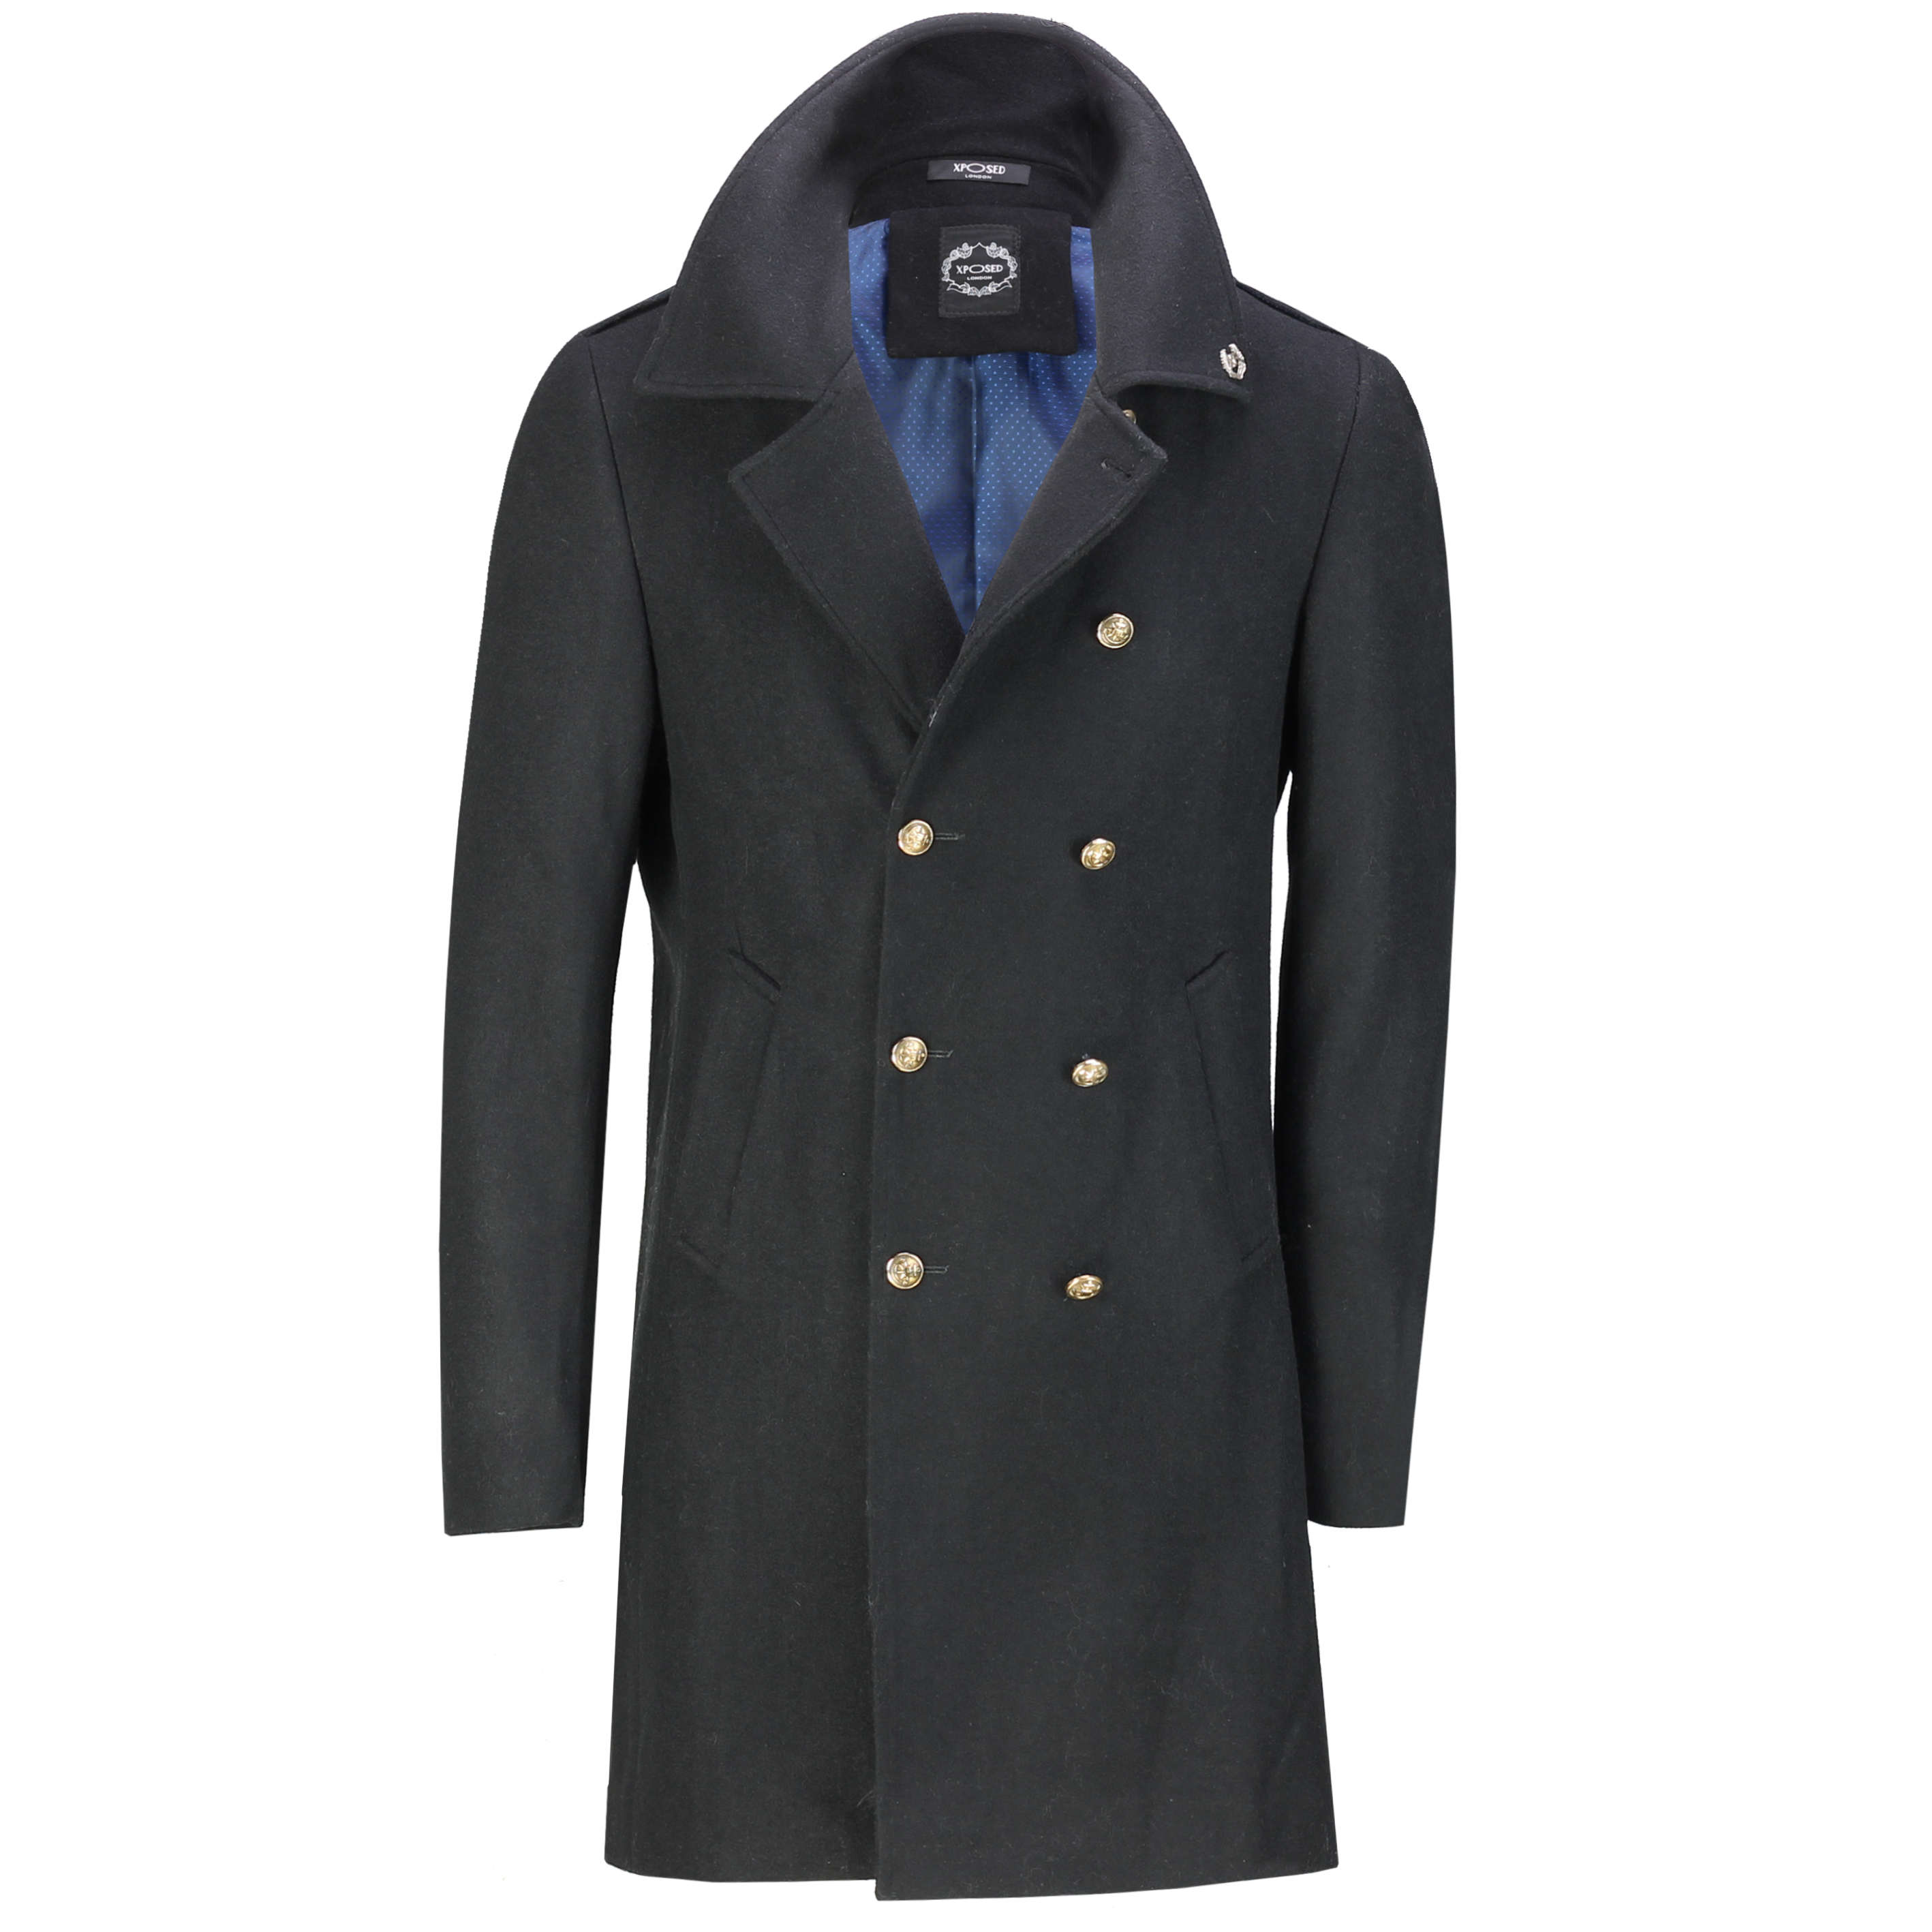 Mens Double Breasted Knee Long Overcoat Vintage War Military Style Wool Mix Jacket 